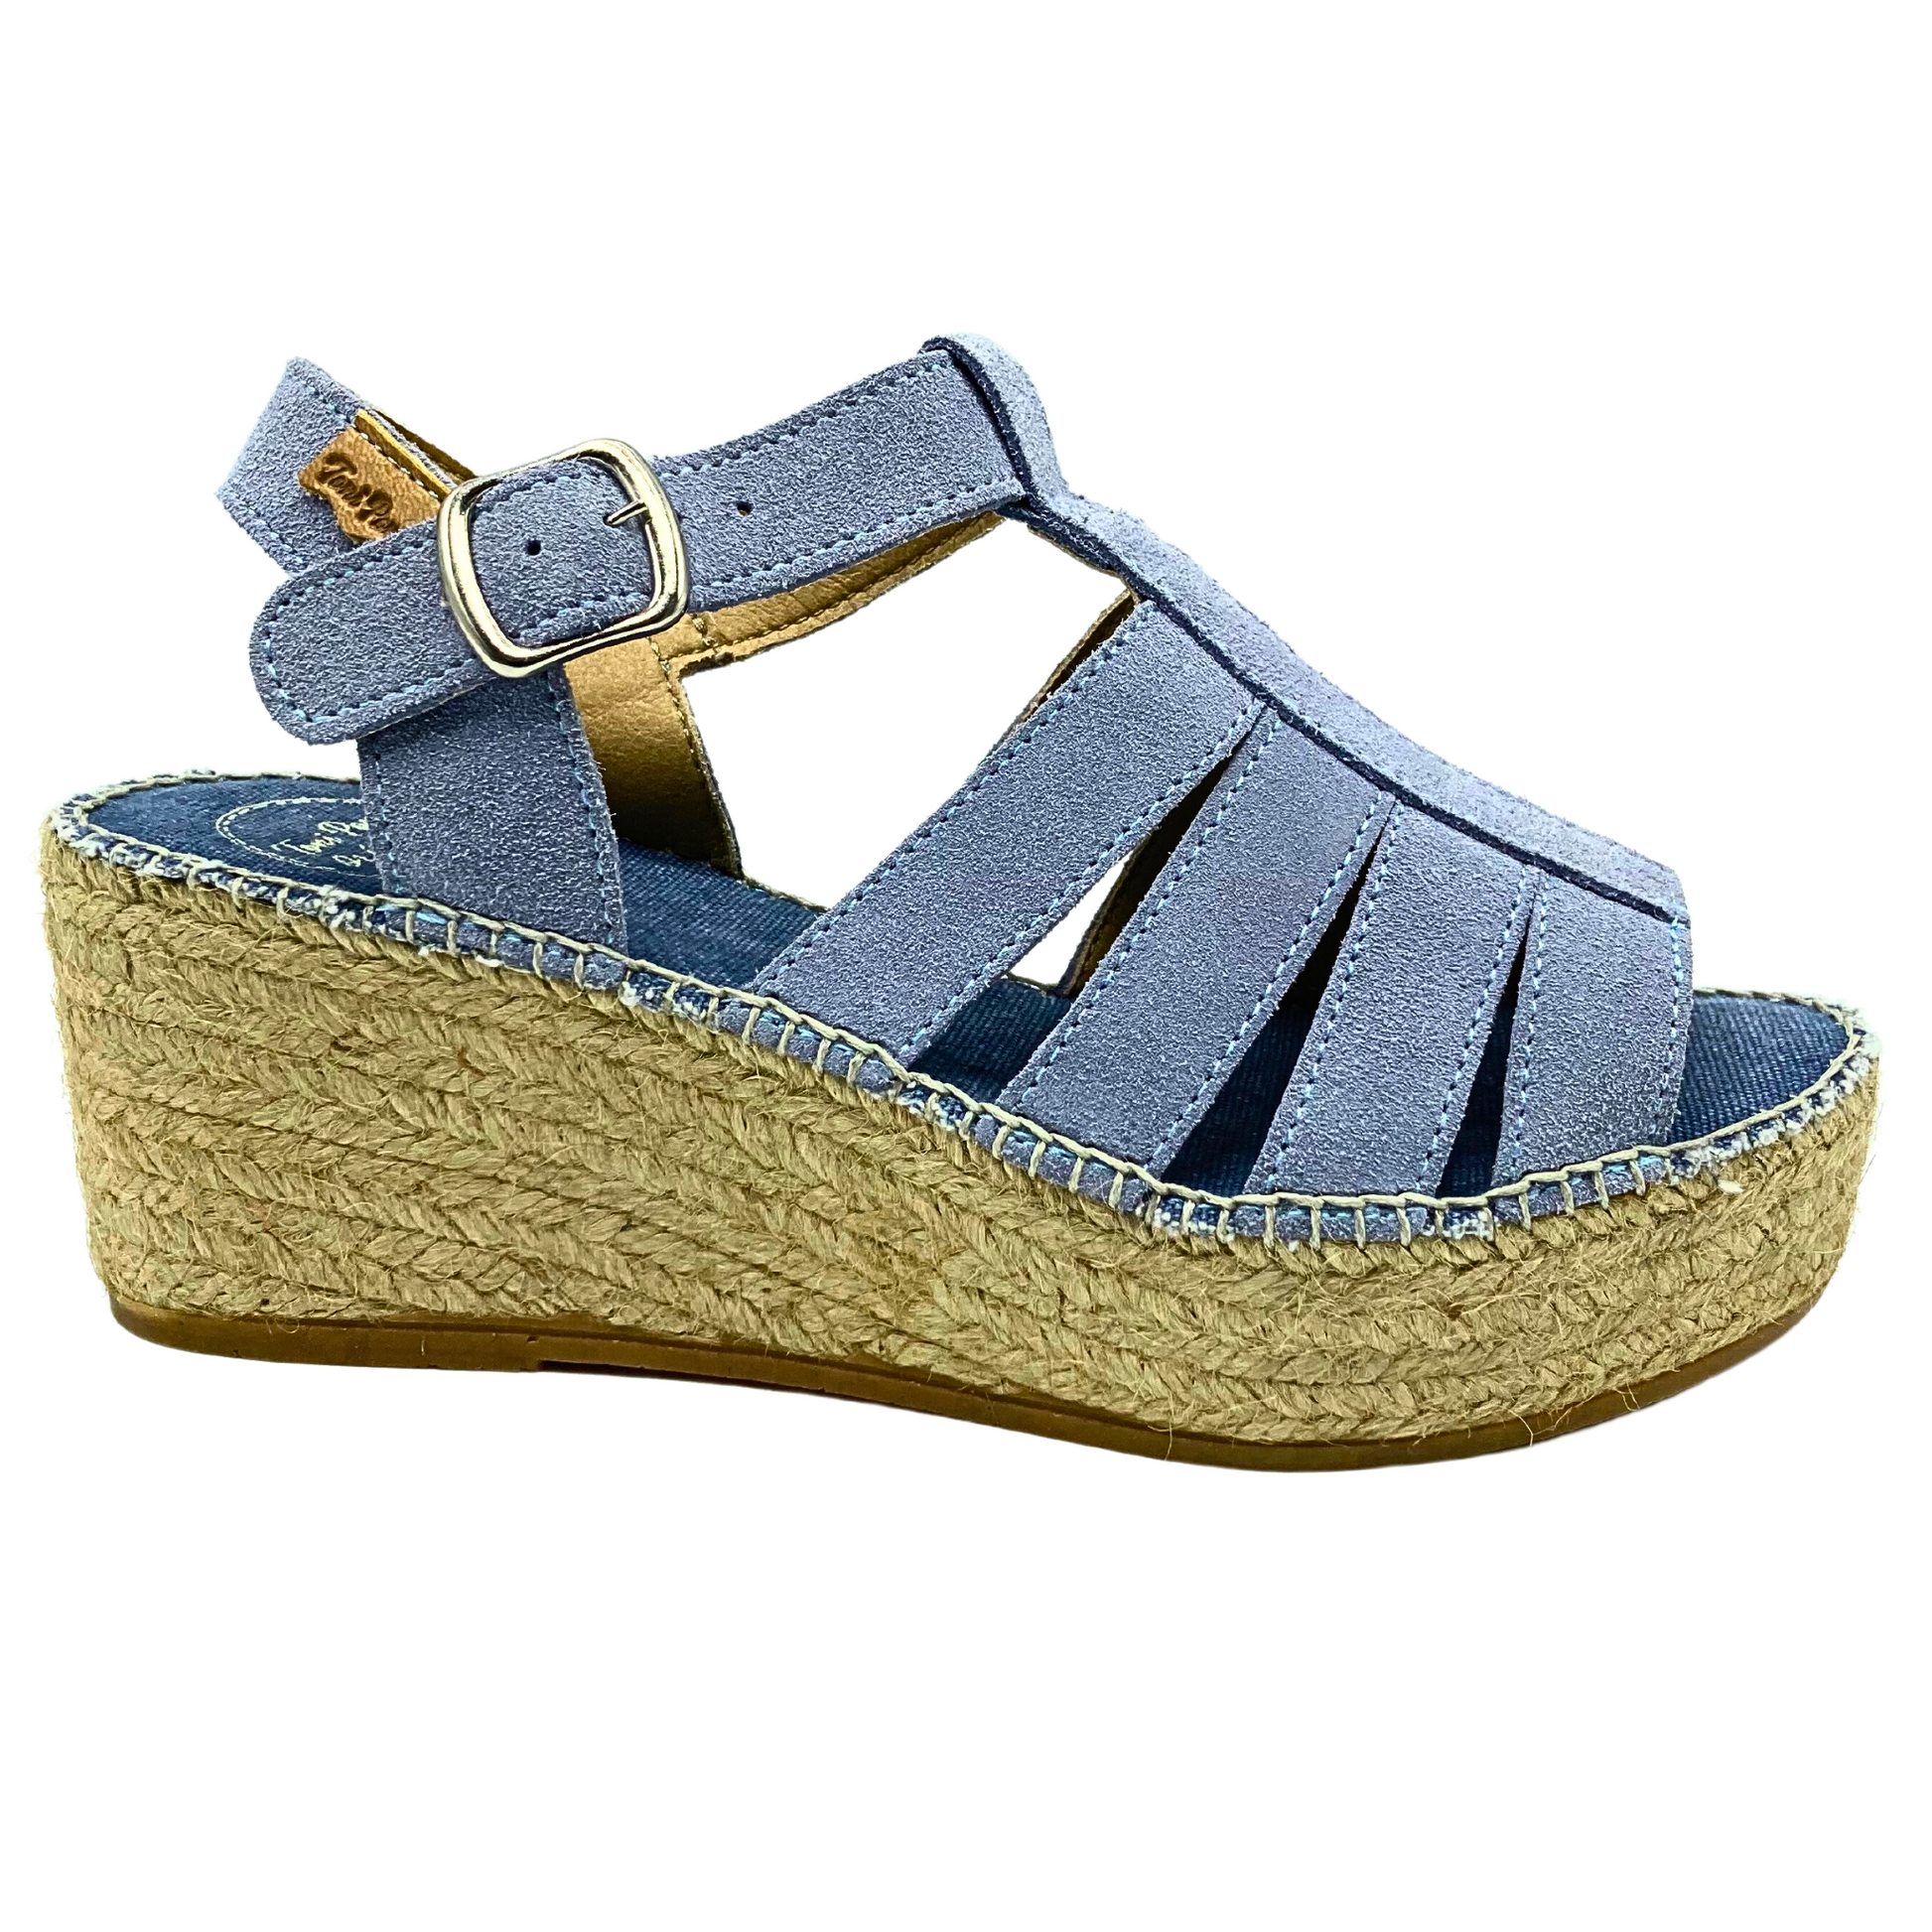 Outside view of Toni Pons Iria espadrille sandal.  Soft blue leather upper has multiple straps down front with a T strap connecting them.  